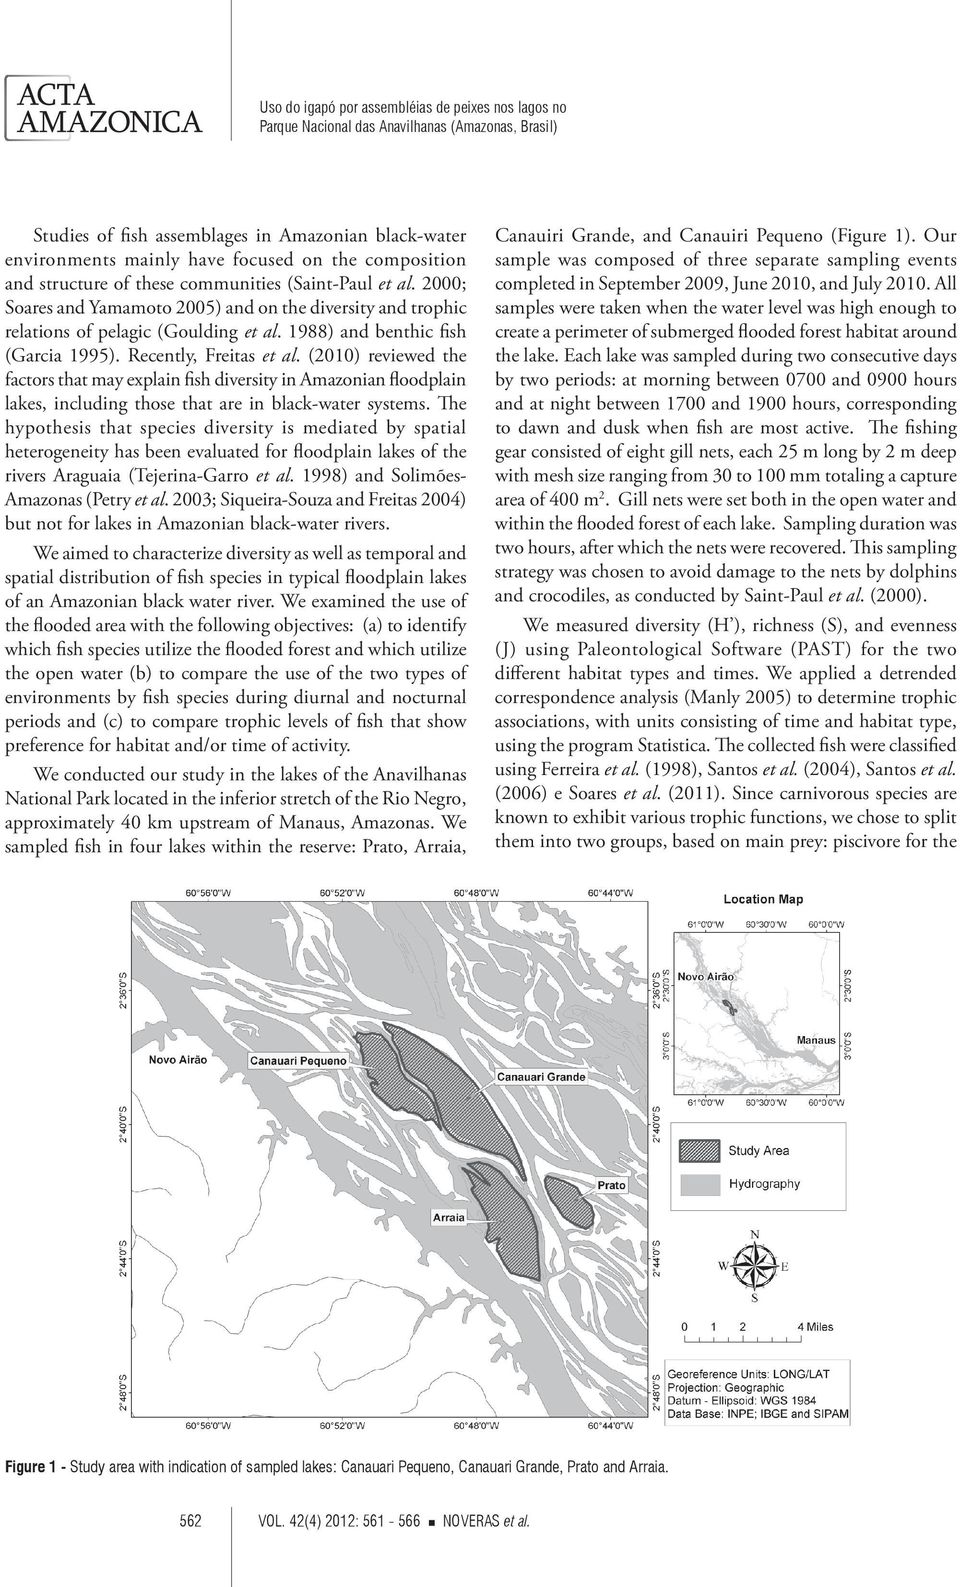 (2010) reviewed the factors that may explain fish diversity in Amazonian floodplain lakes, including those that are in black-water systems.